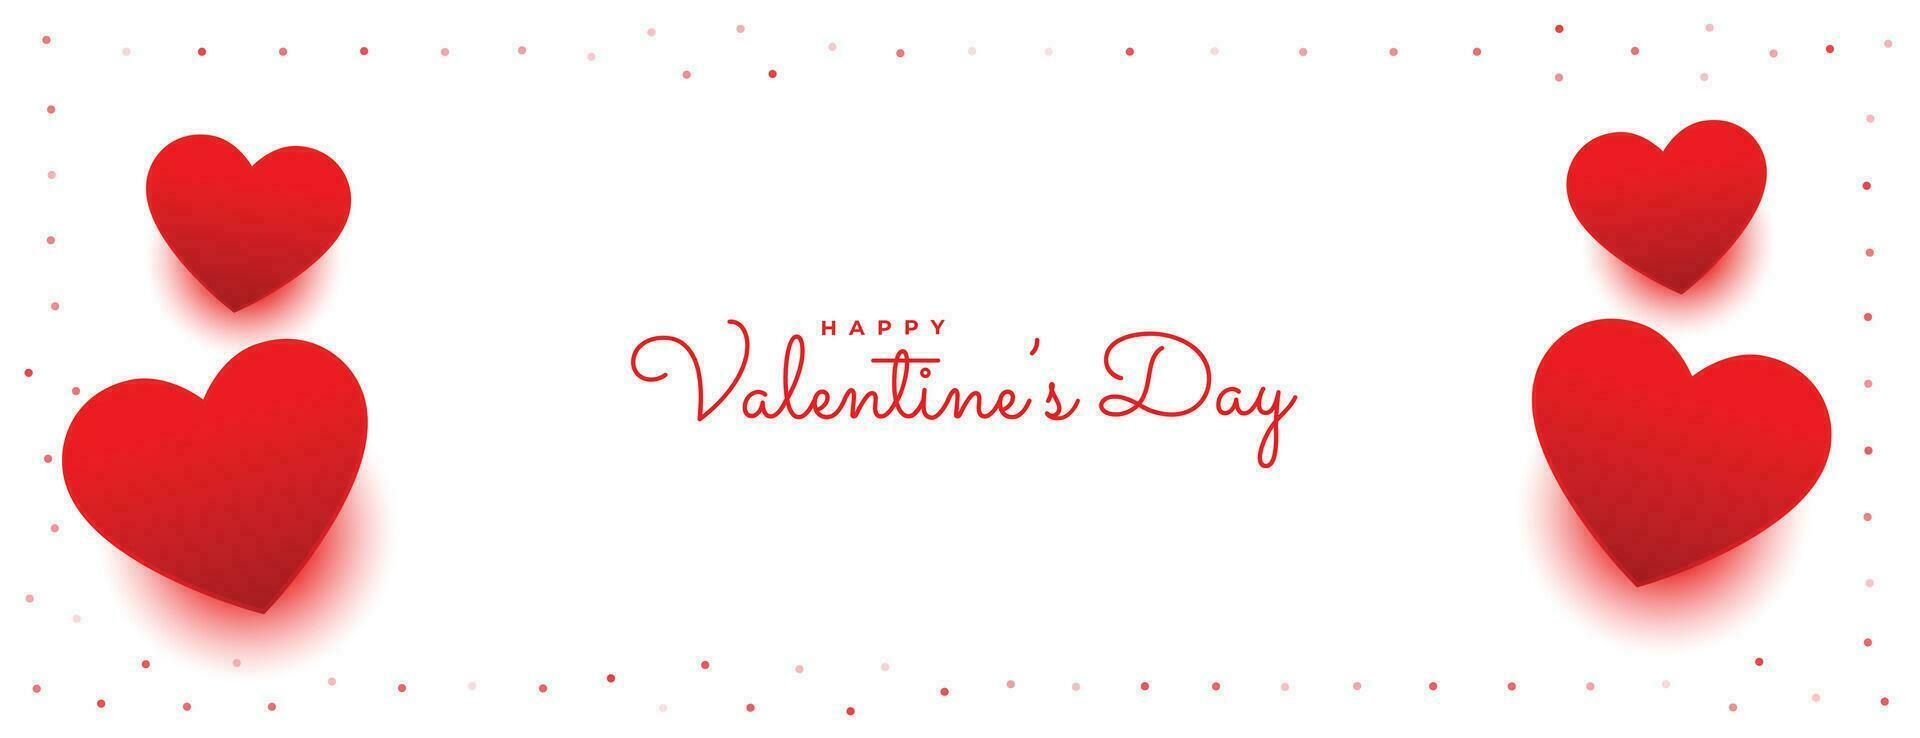 happy valentines day beautiful hearts banner design vector